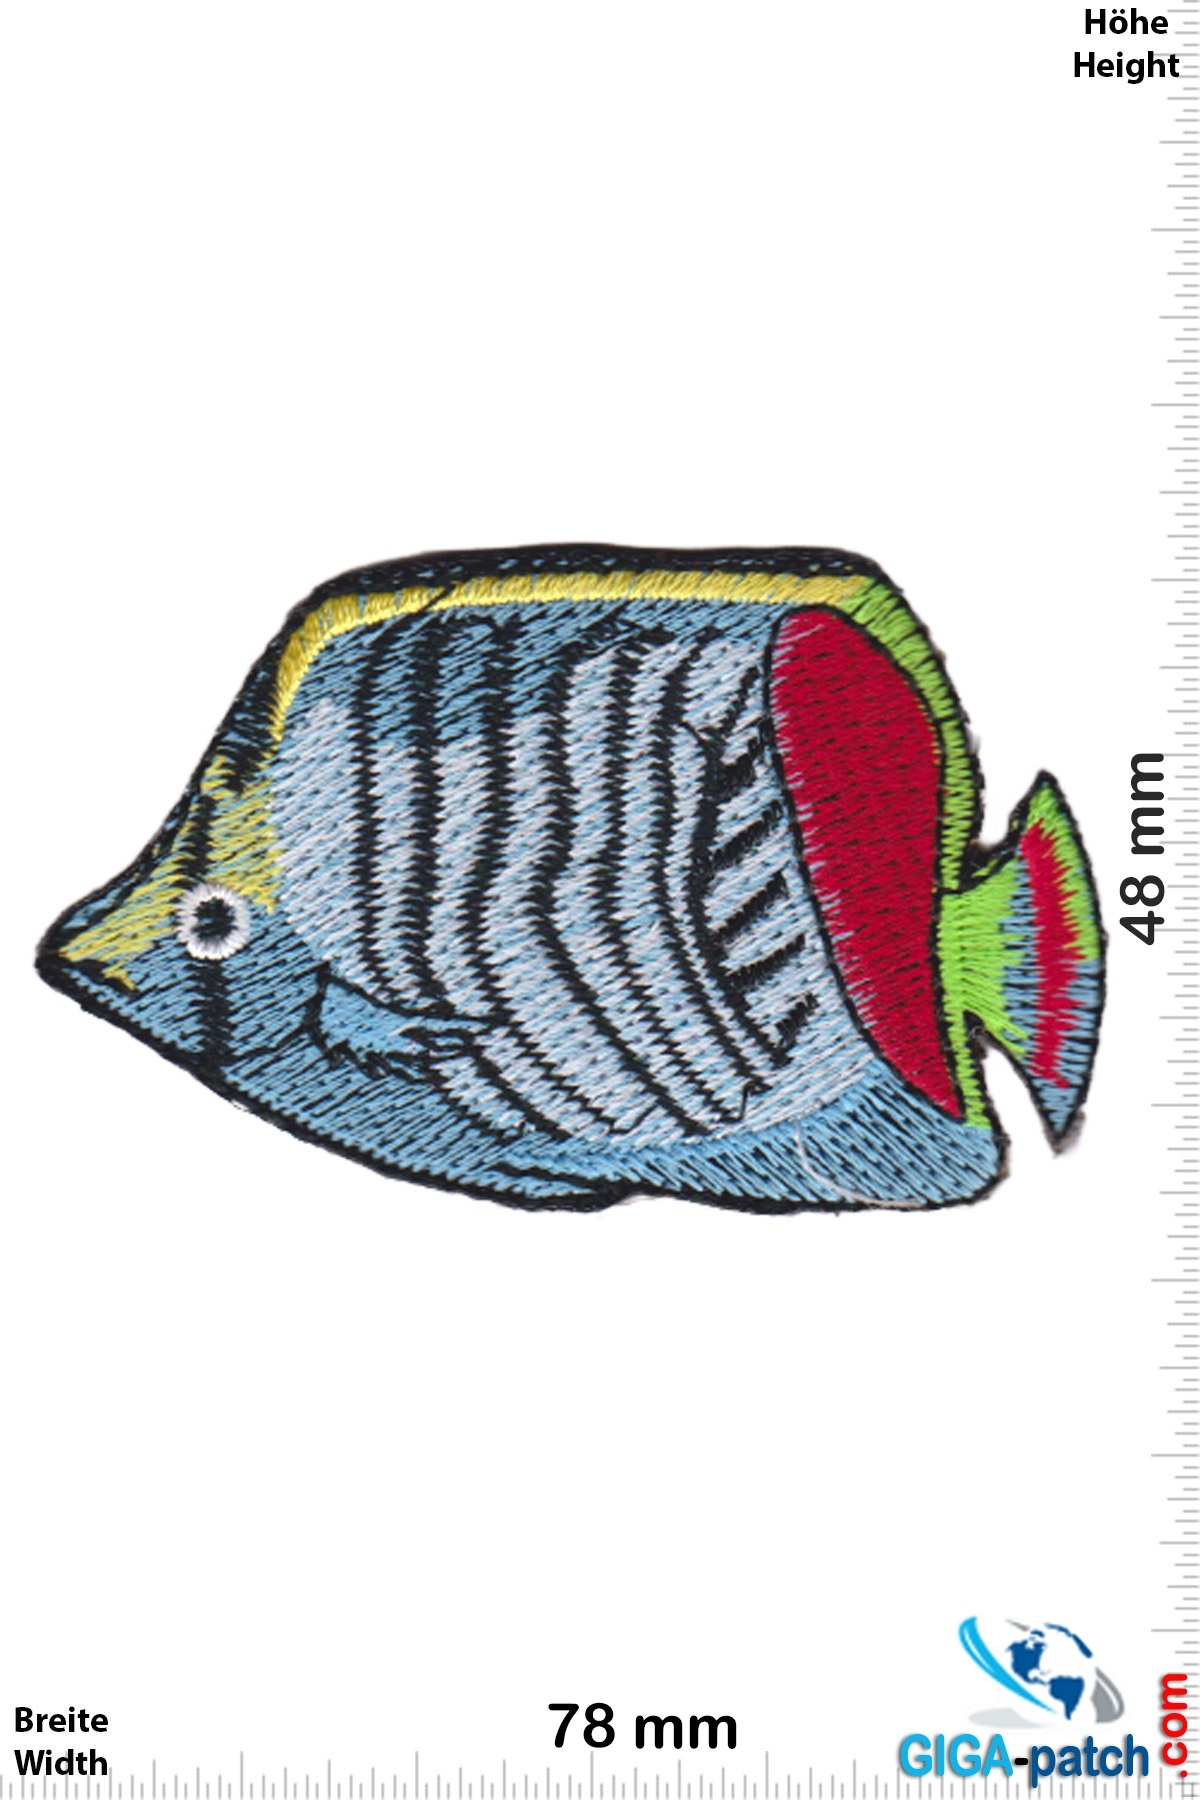 Fisch Fish - sea fish - blue red yellow